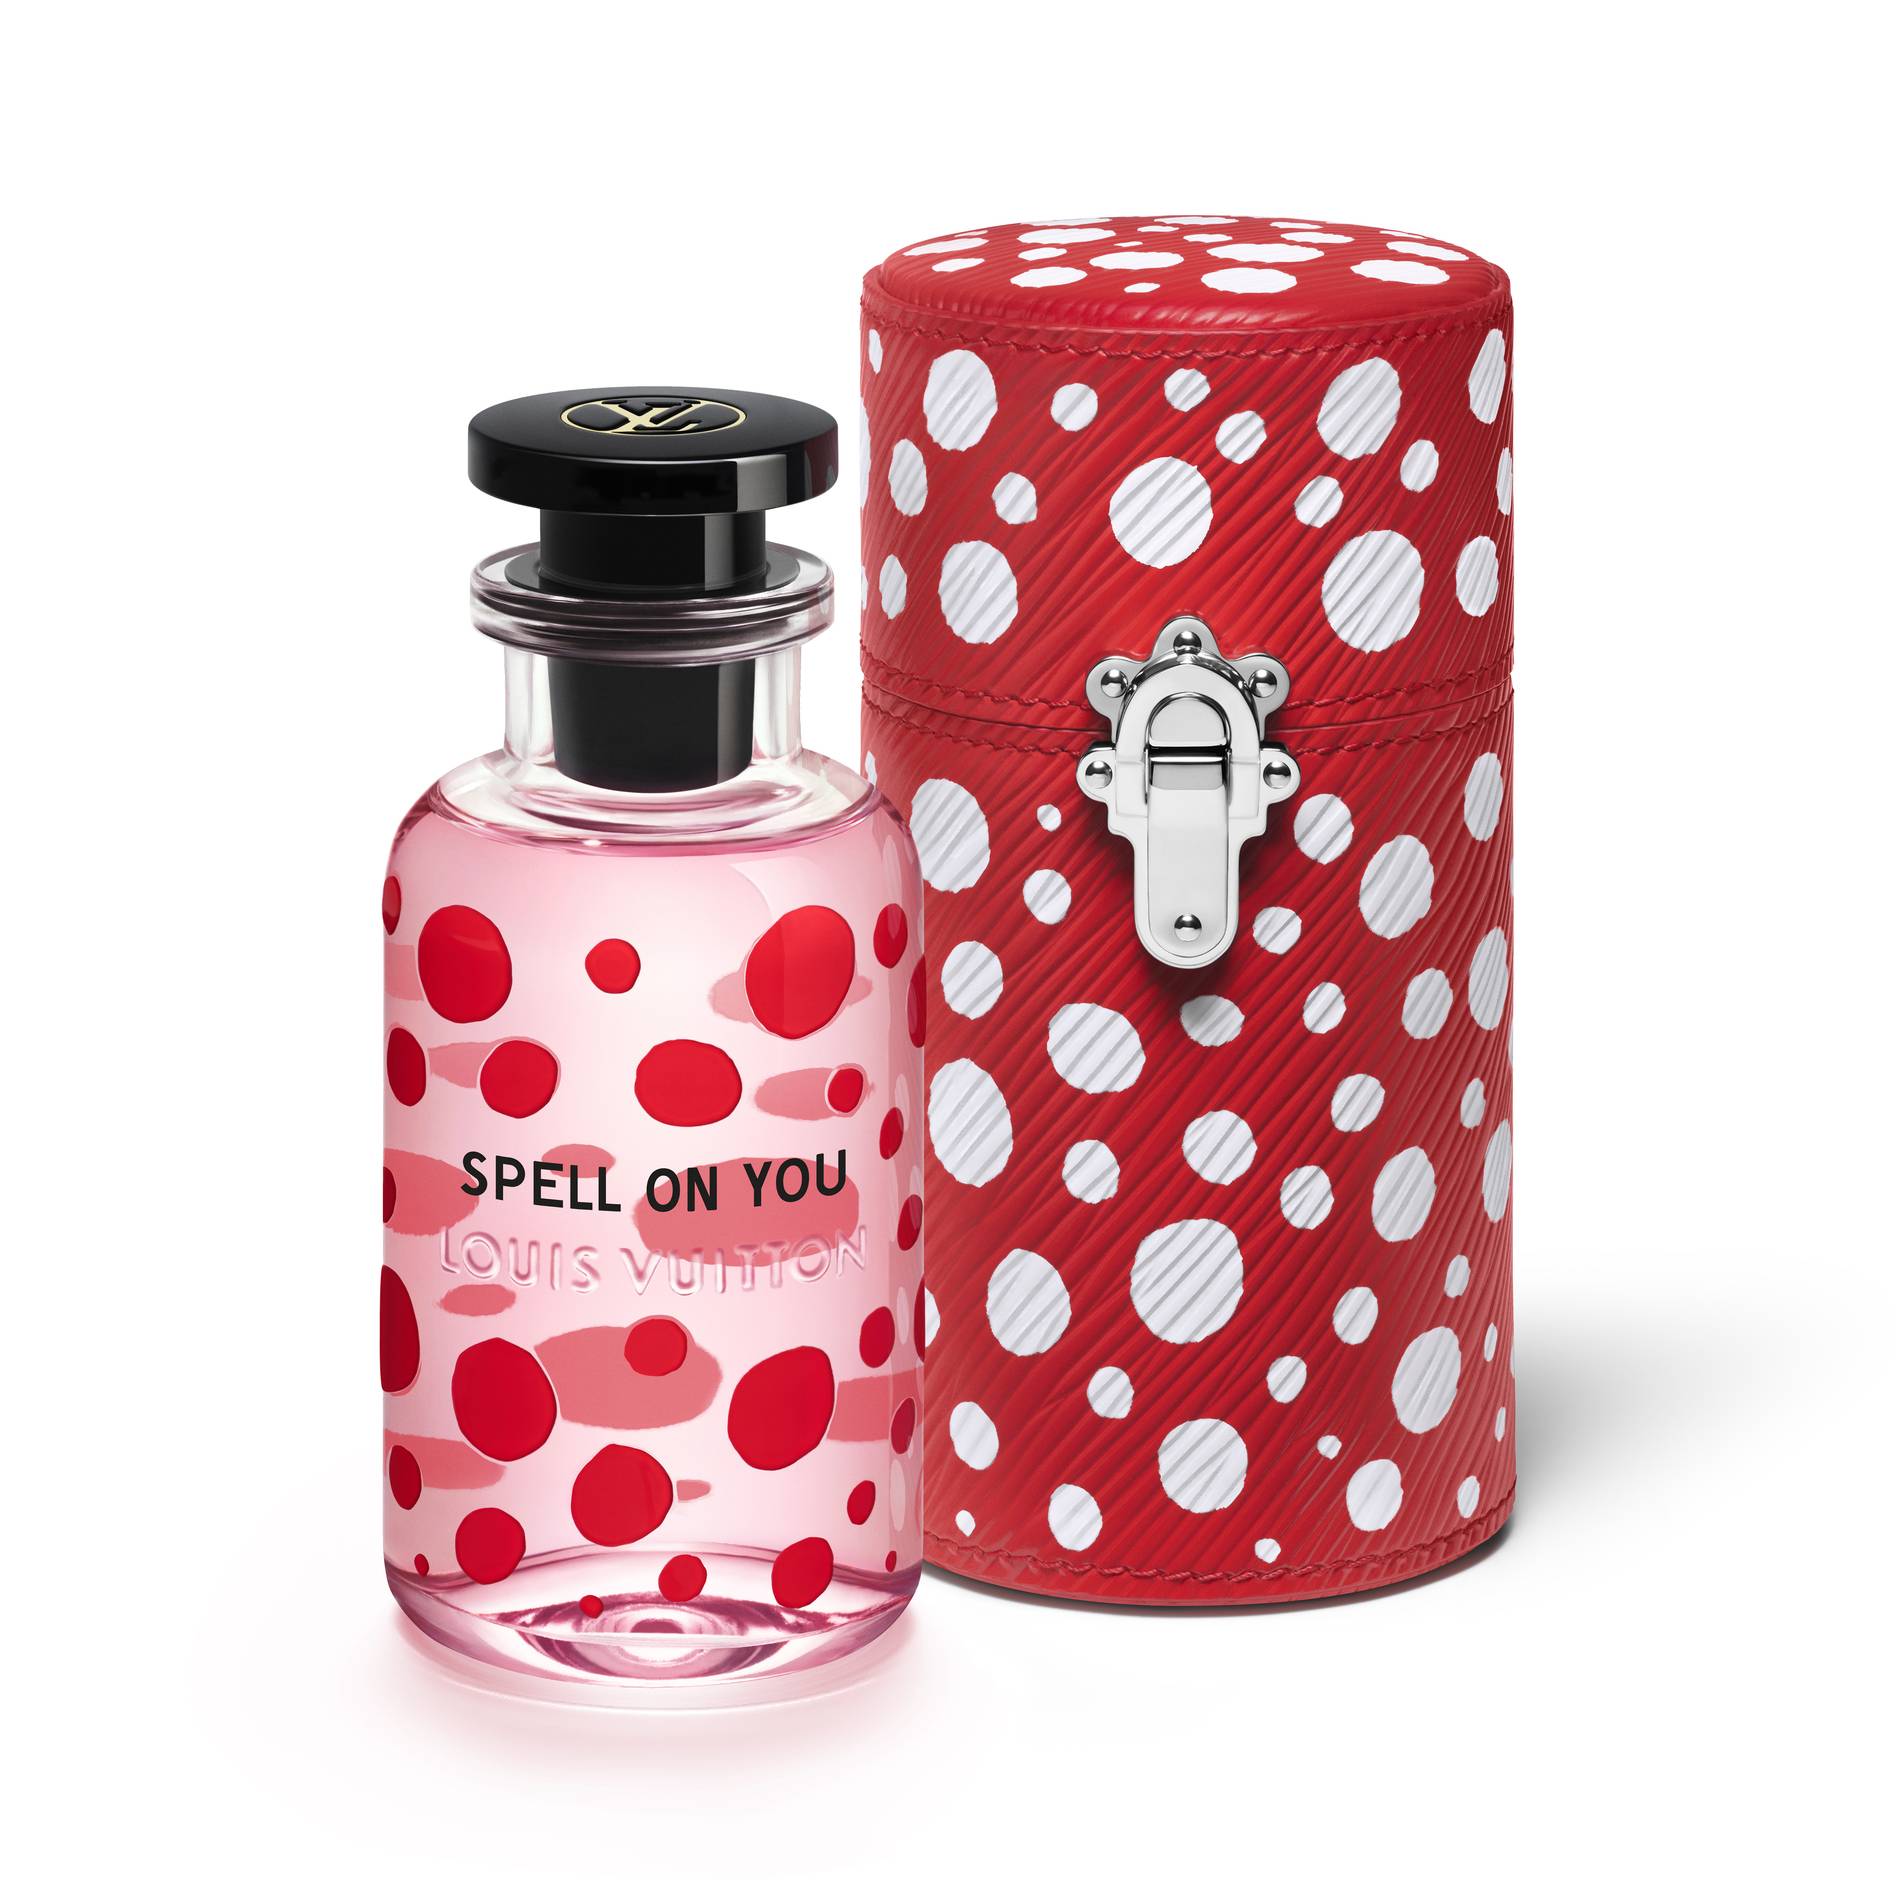 spell on you Louis Vuitton fragrance bottle designed by Yayoi Kusama